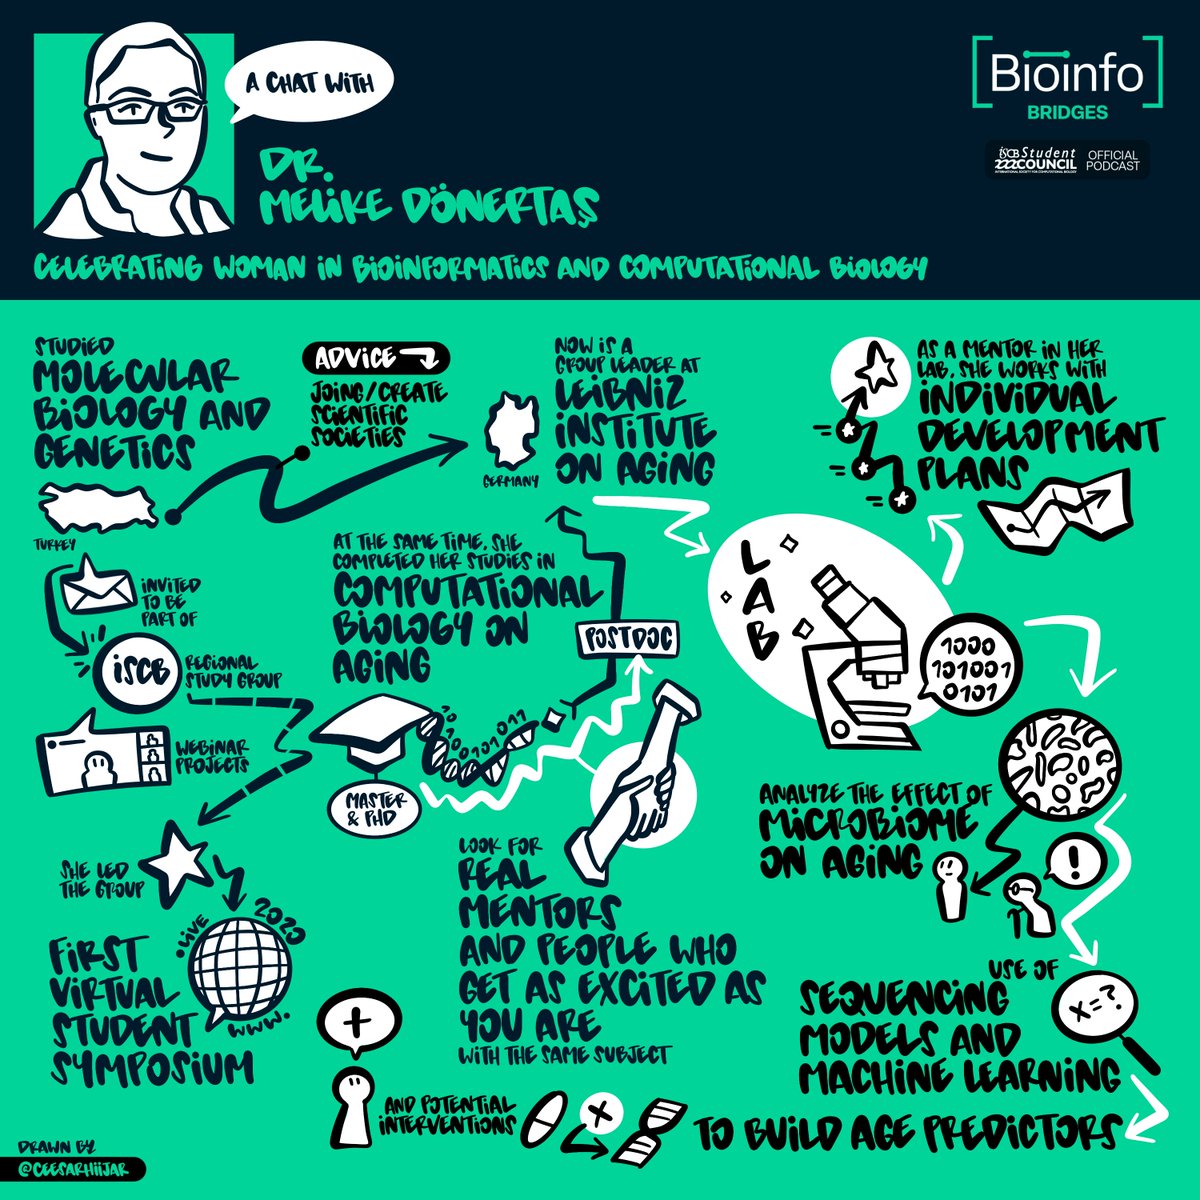 Haven't you heard our first 'BionfoBridges' podcast episode yet? Here is a summary of what you can expect when diving into this fantastic chat with Dr. @melikedonertas and her research about elucidating the relationship between microbiome and aging processes. Moreover, we